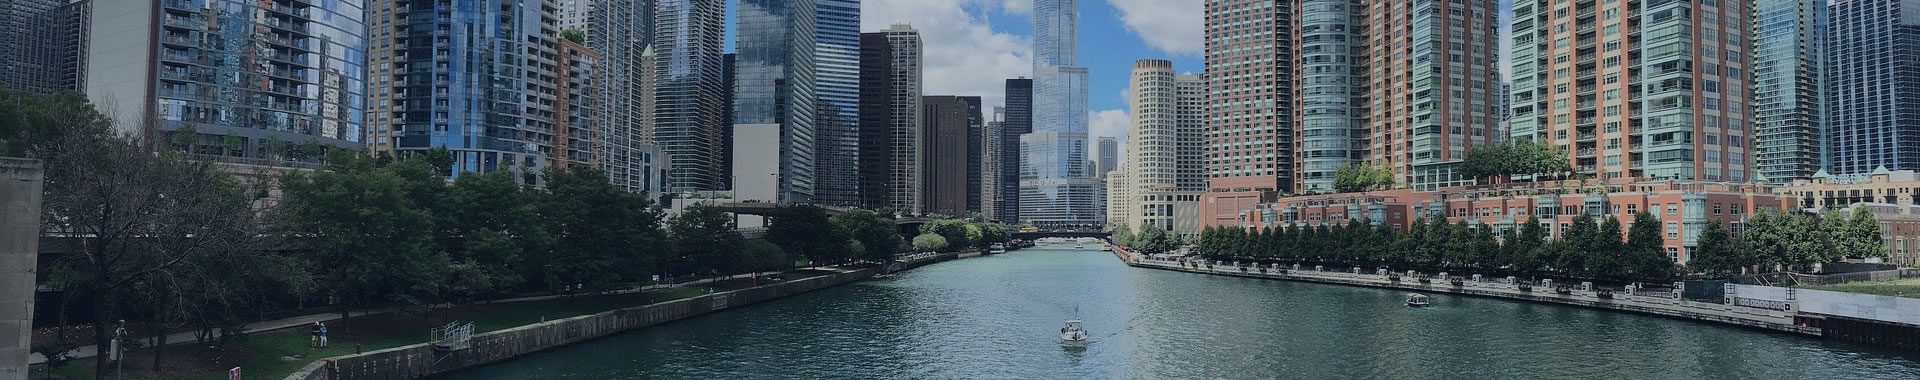 Photo of downtown Chicago and river flowing through it.